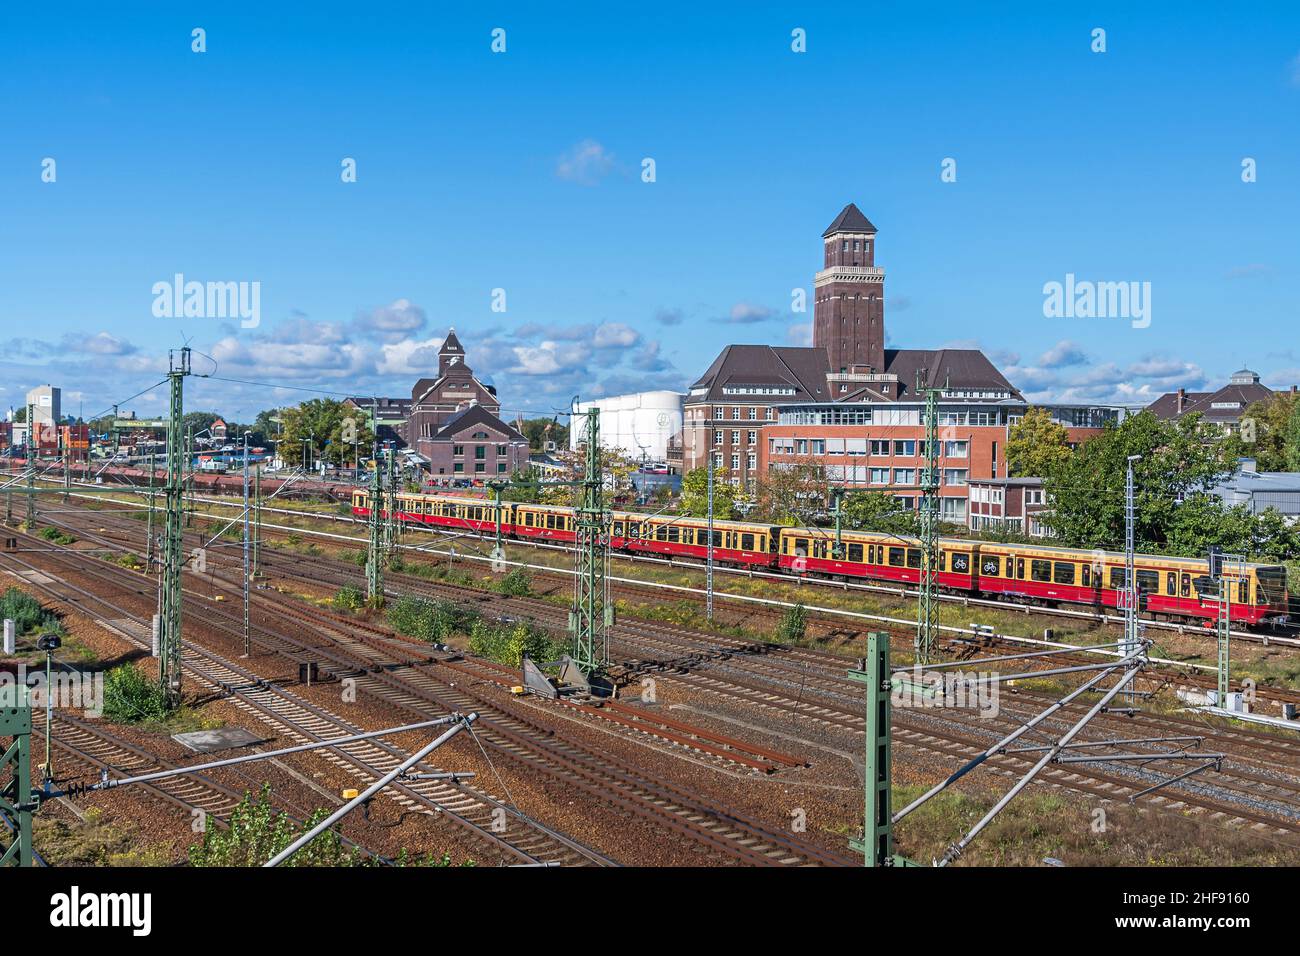 Berlin, Germany - October 6, 2021: Railroad station, administration building and S-Bahn train in the Westhafen harbor BEHALA, one of Germany’s largest Stock Photo